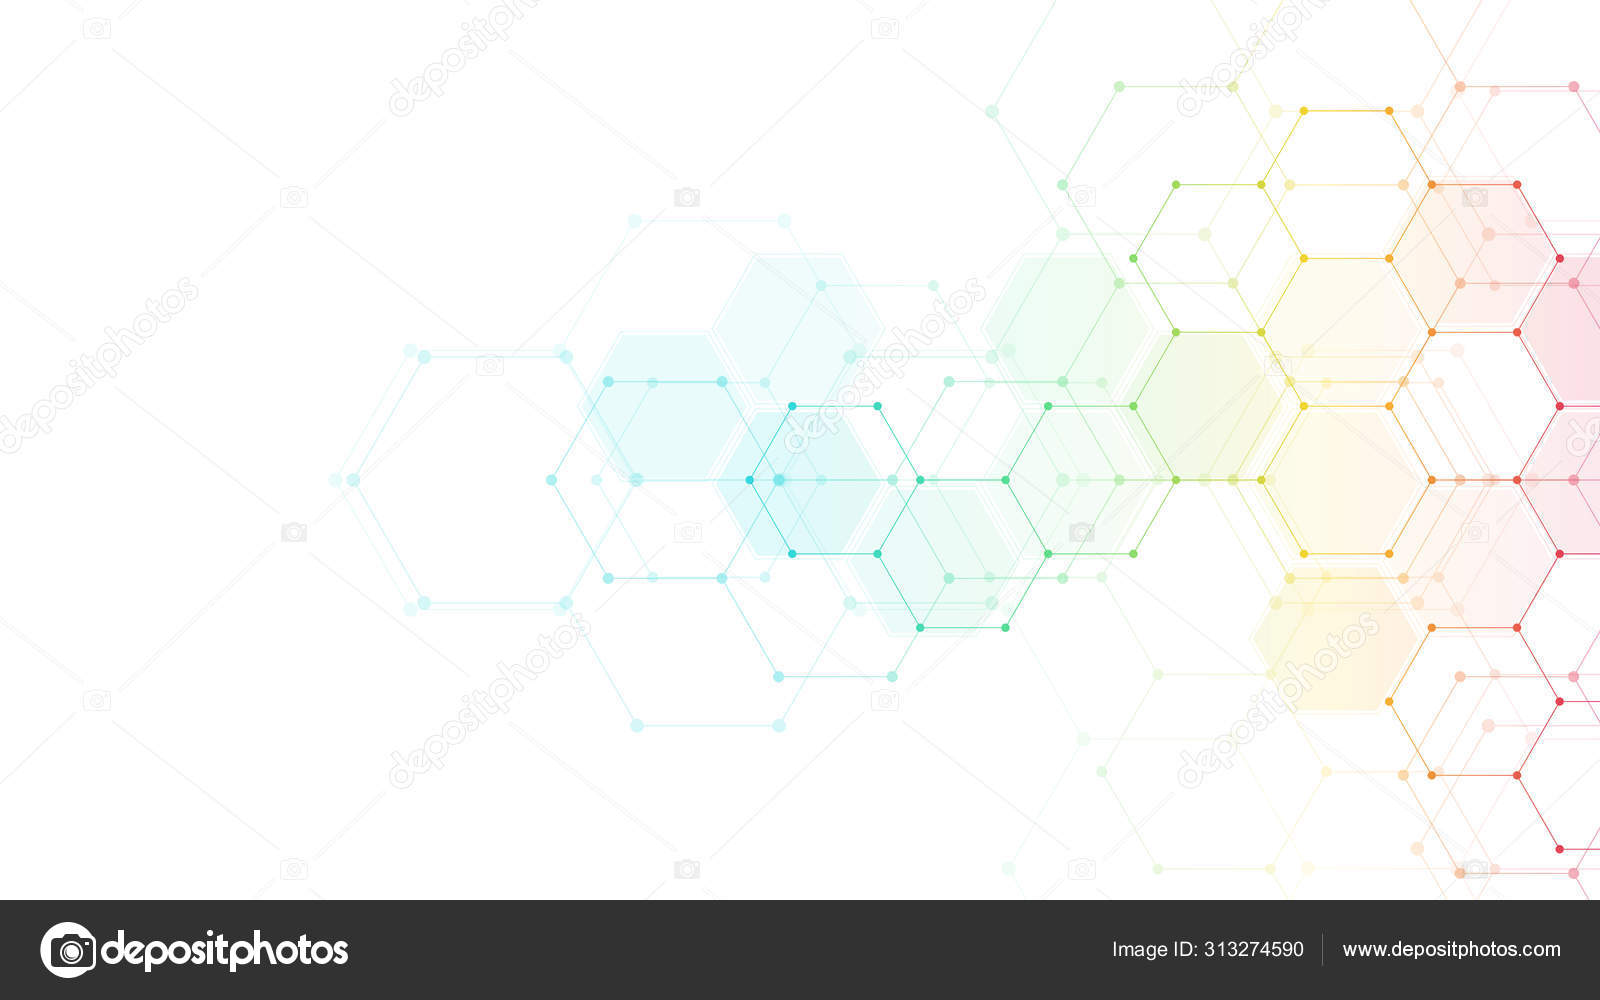 Abstract medical background with hexagons pattern. Concepts and ideas ...